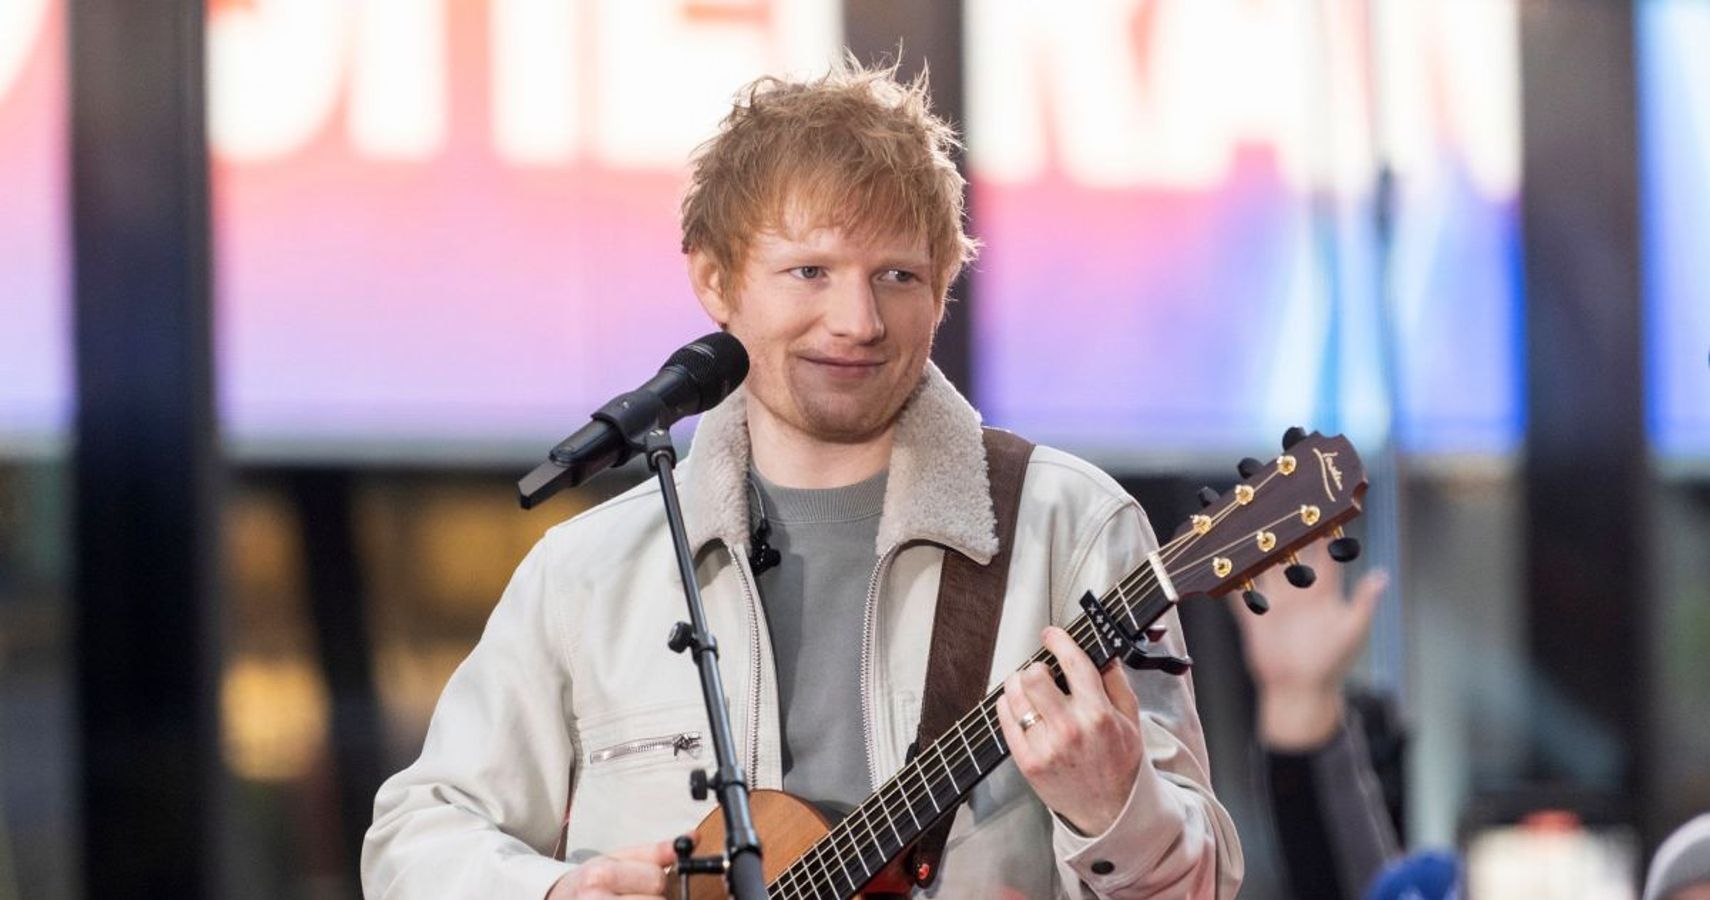 Ed Sheeran Ordered To Pay $100 Million Over Marvin Gaye's Copyright Claims